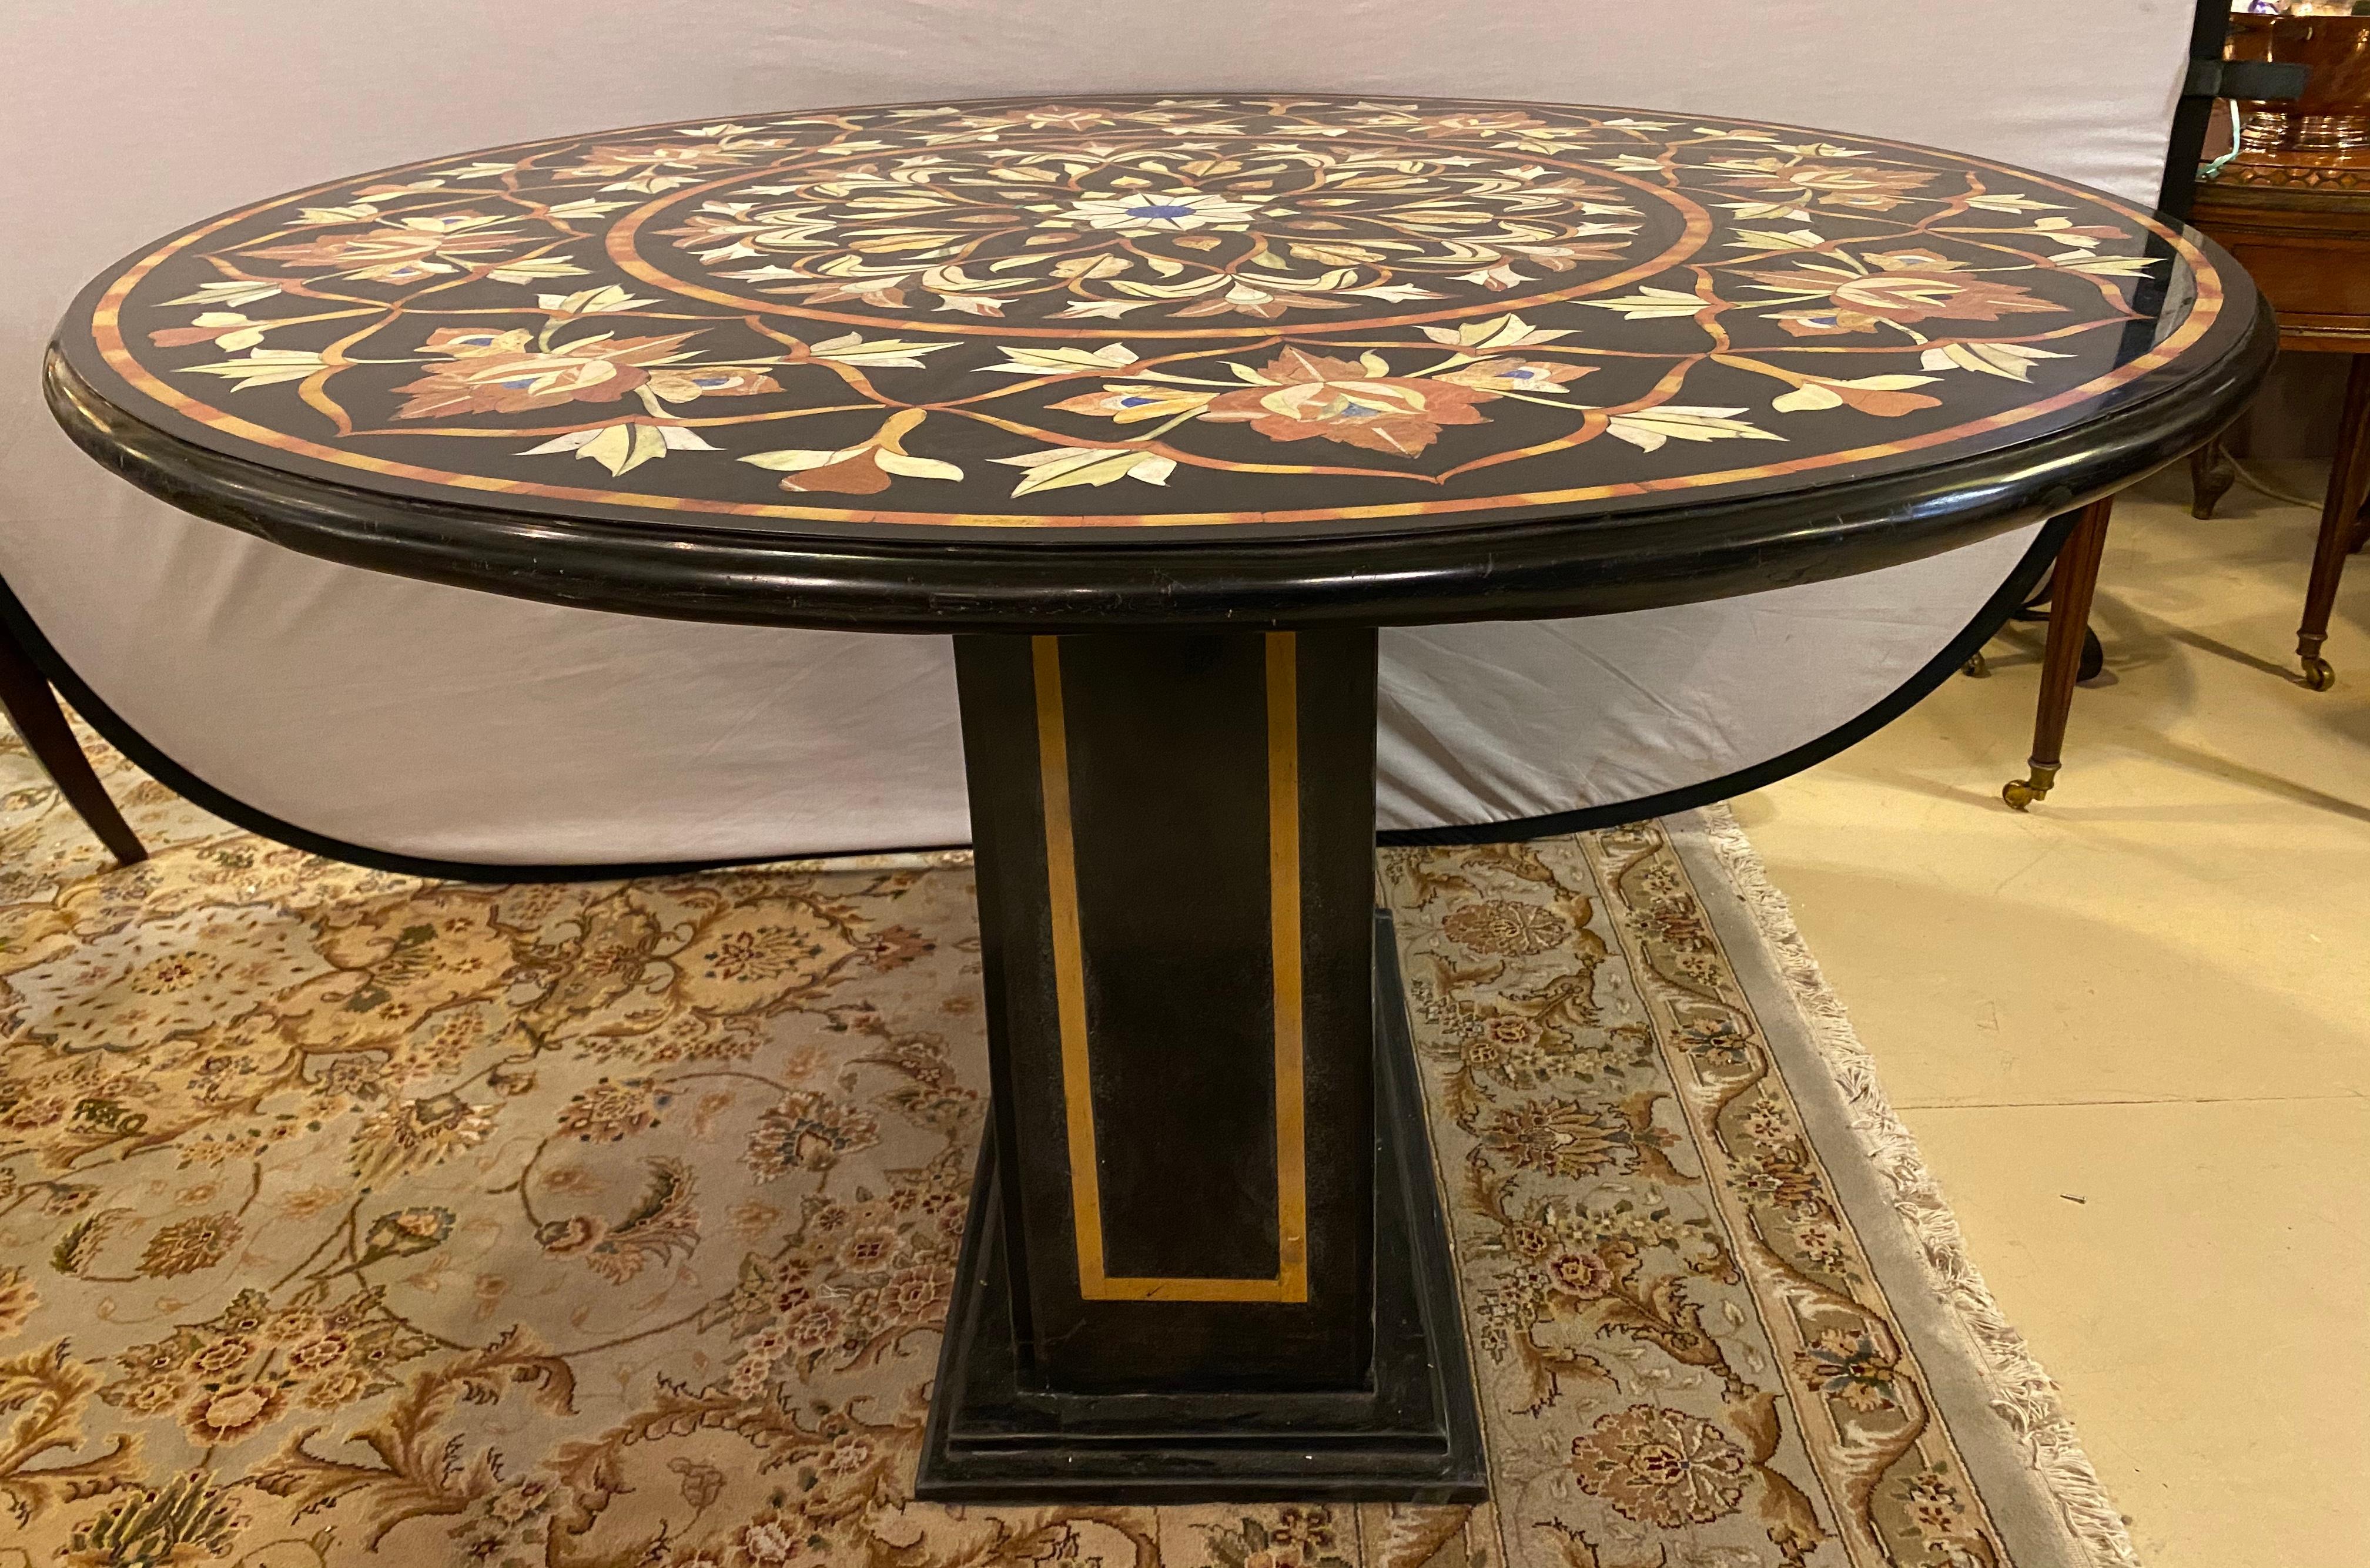 Pietra Dura marble top dining or center table with marble ebony inlaid pedestal base.The finely cut and inlaid marble tabletop is 1.5 inches thick with rounded edges and is 48 inches in diameter. This stunning center or dining table is one of two